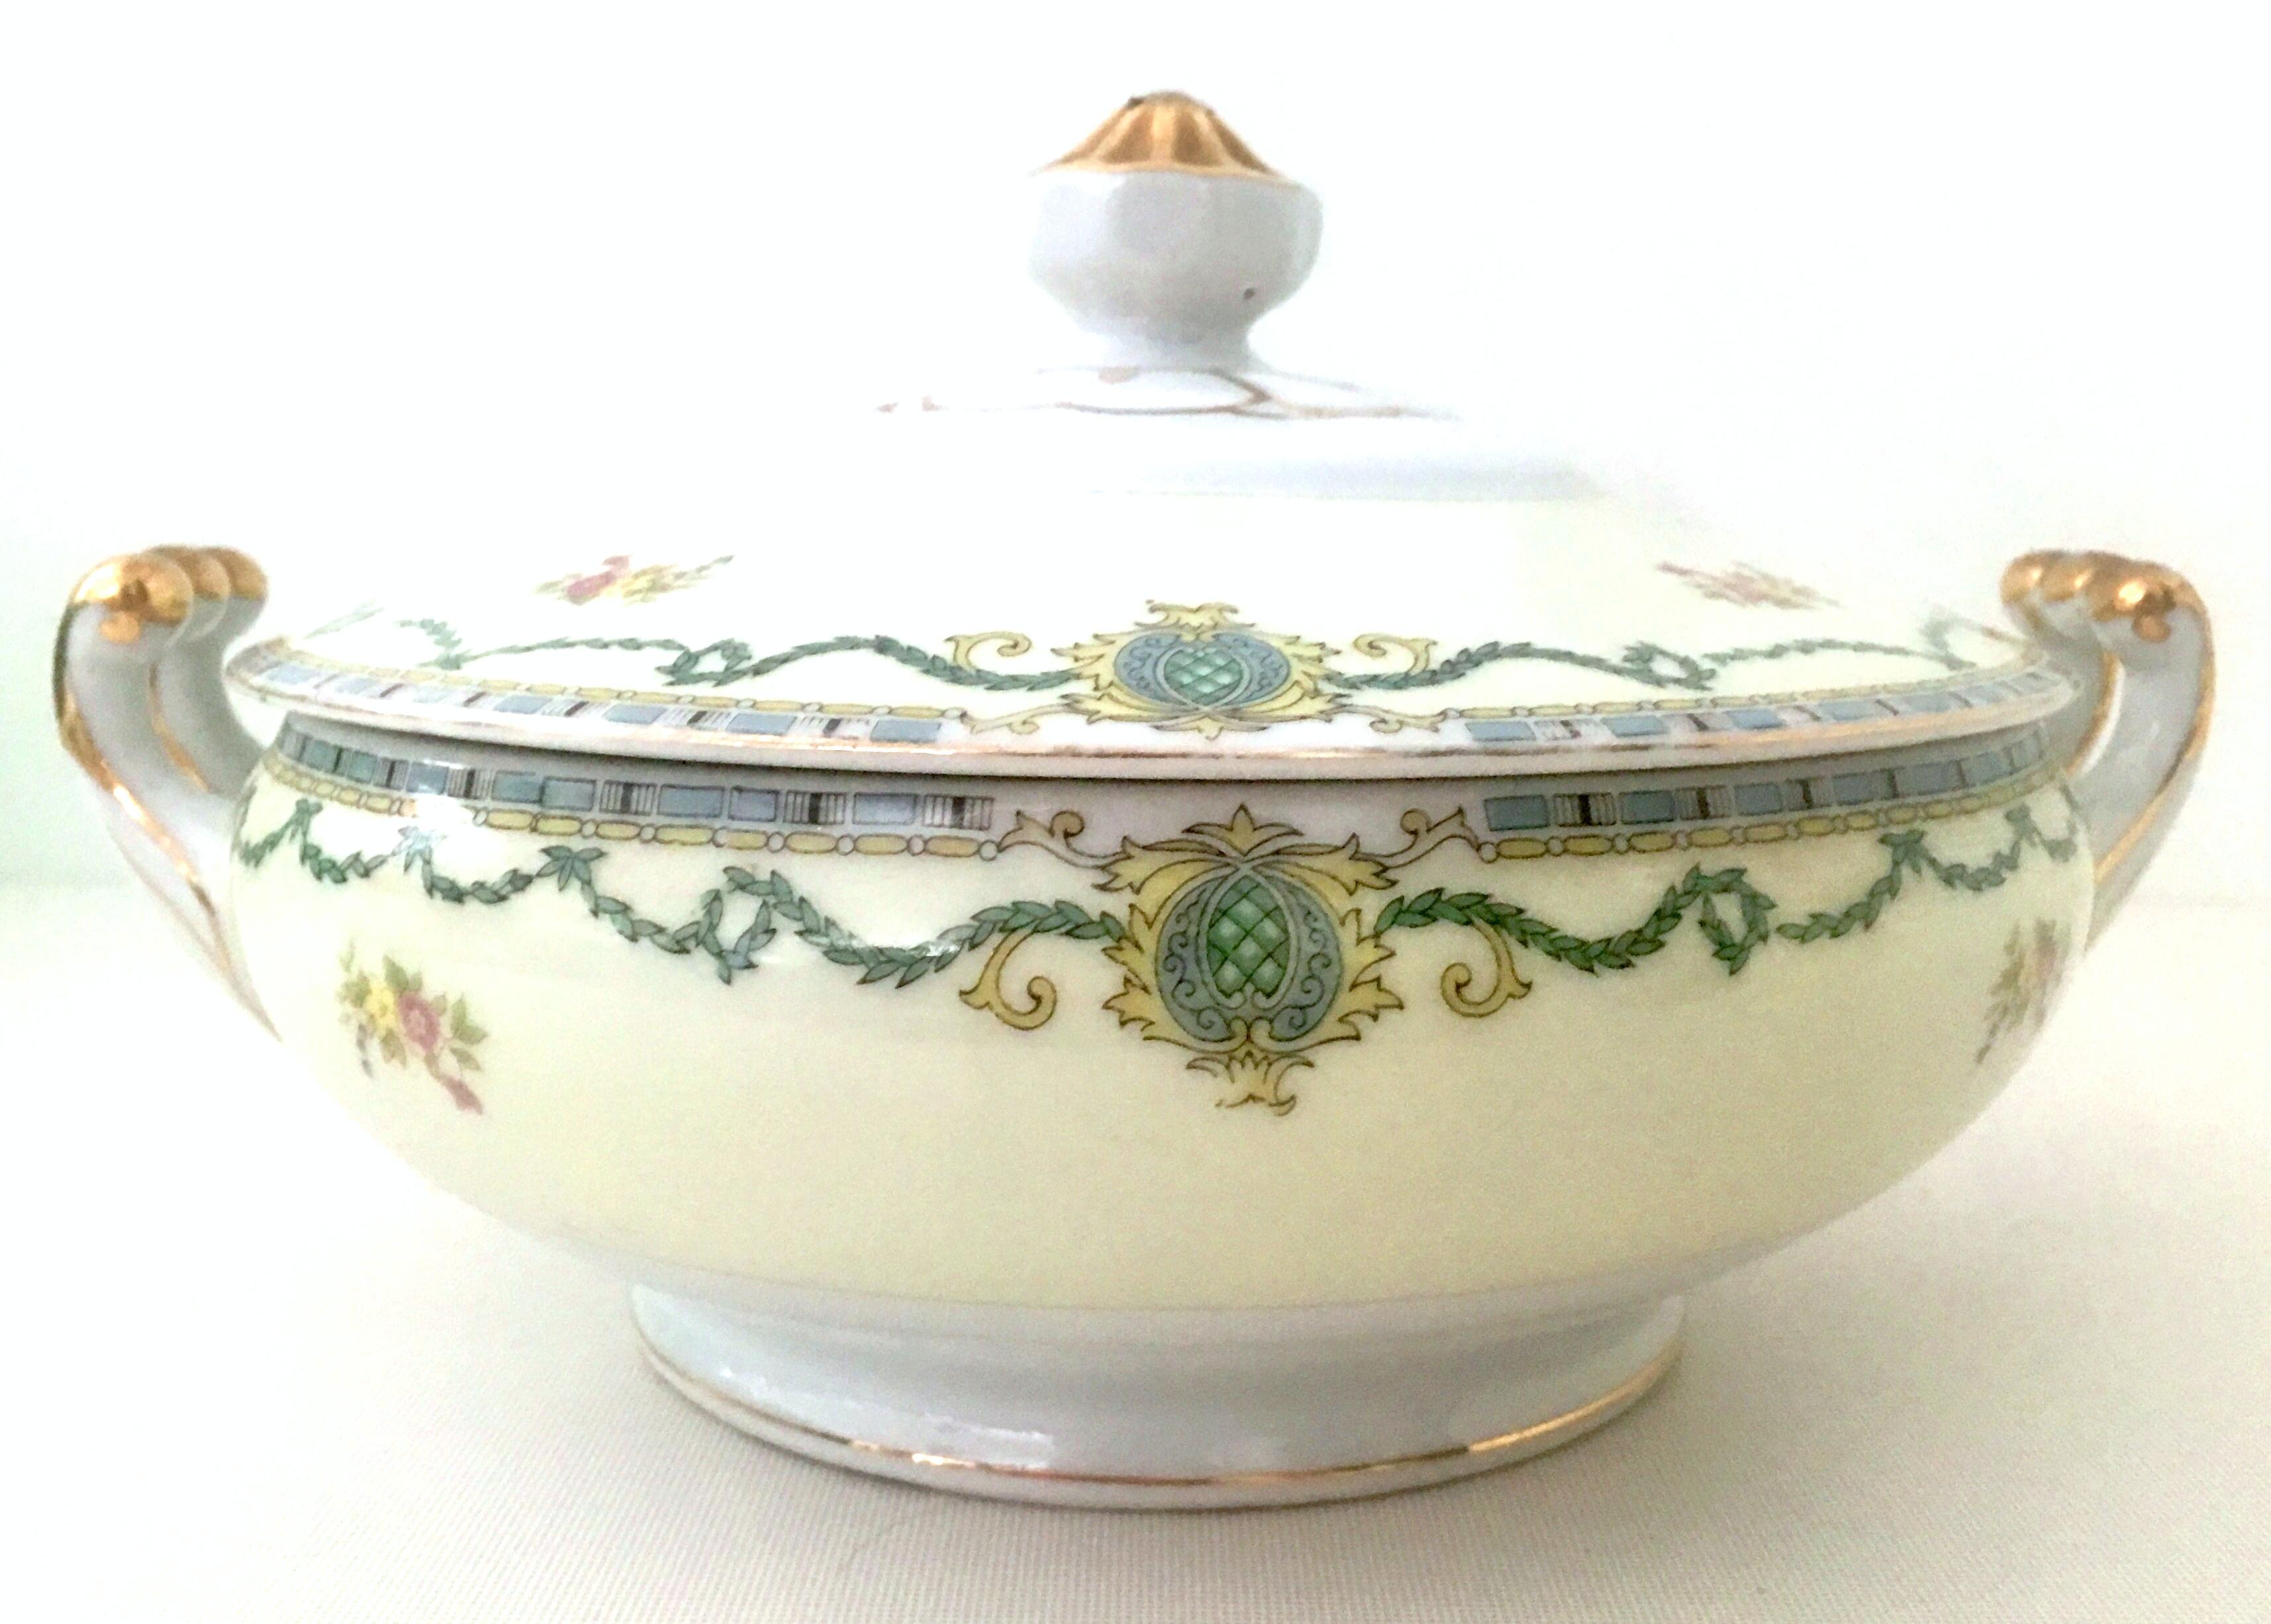 Antique Art Nouveau Porcelain & 22K Gold Lidded Tureen by, Gold China-Japan. This Art Nouveau motif porcelain and hand painted 22K gold detail tureen features a bright white and pale yellow ground. The design features green, blue, yellow vine,